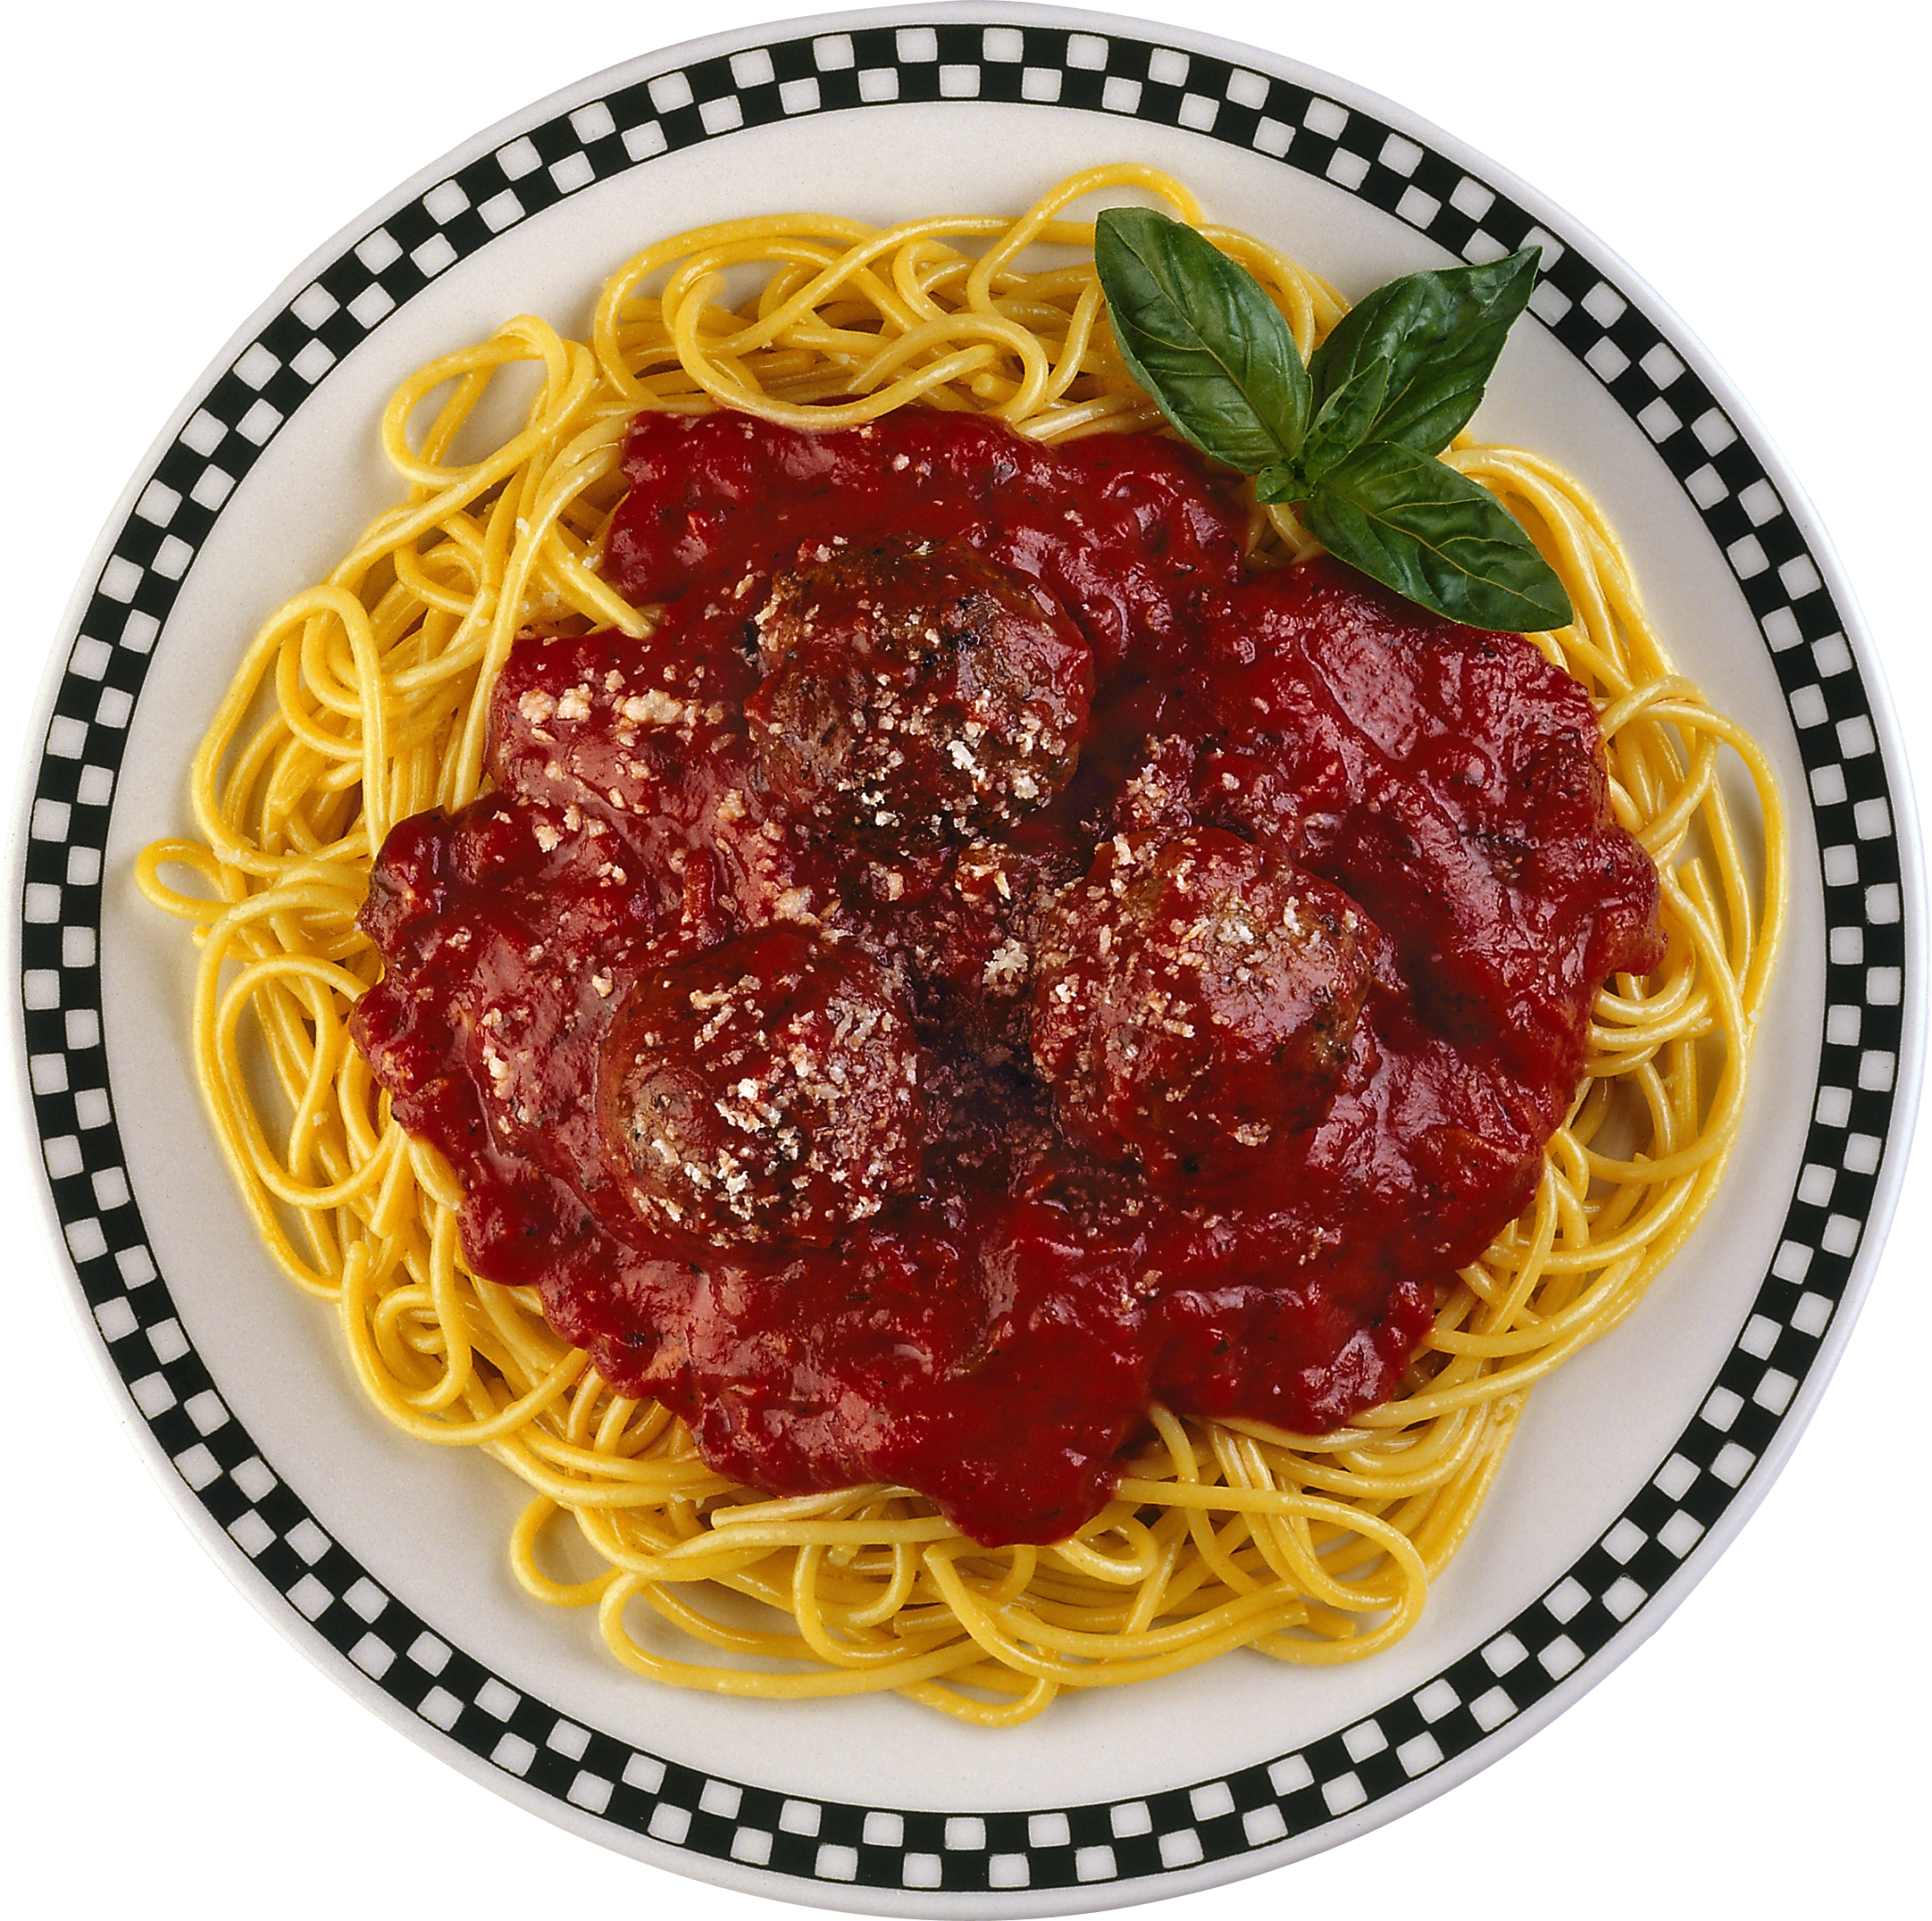 Png images free download. Spaghetti clipart pasta sauce